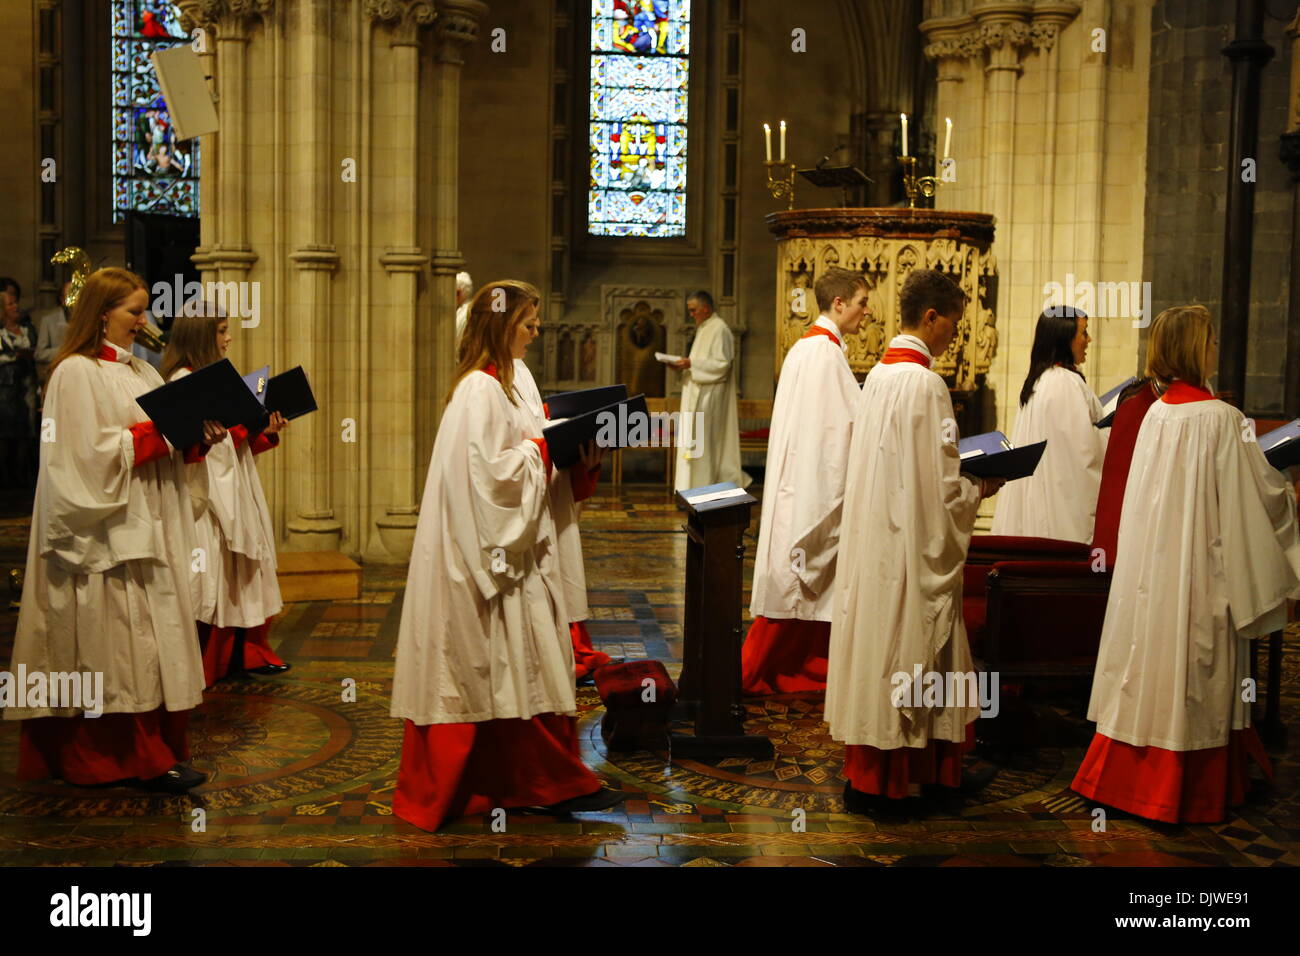 Dublin, Ireland. 30th November 2013. The choir of Christ Church Cathedral processes into the Cathedral. The Most Revd Pat Storey has been consecrated as Church of Ireland Bishop of Meath and Kildare in Dublin's Christ Church Cathedral. Credit:  Michael Debets/Alamy Live News Stock Photo